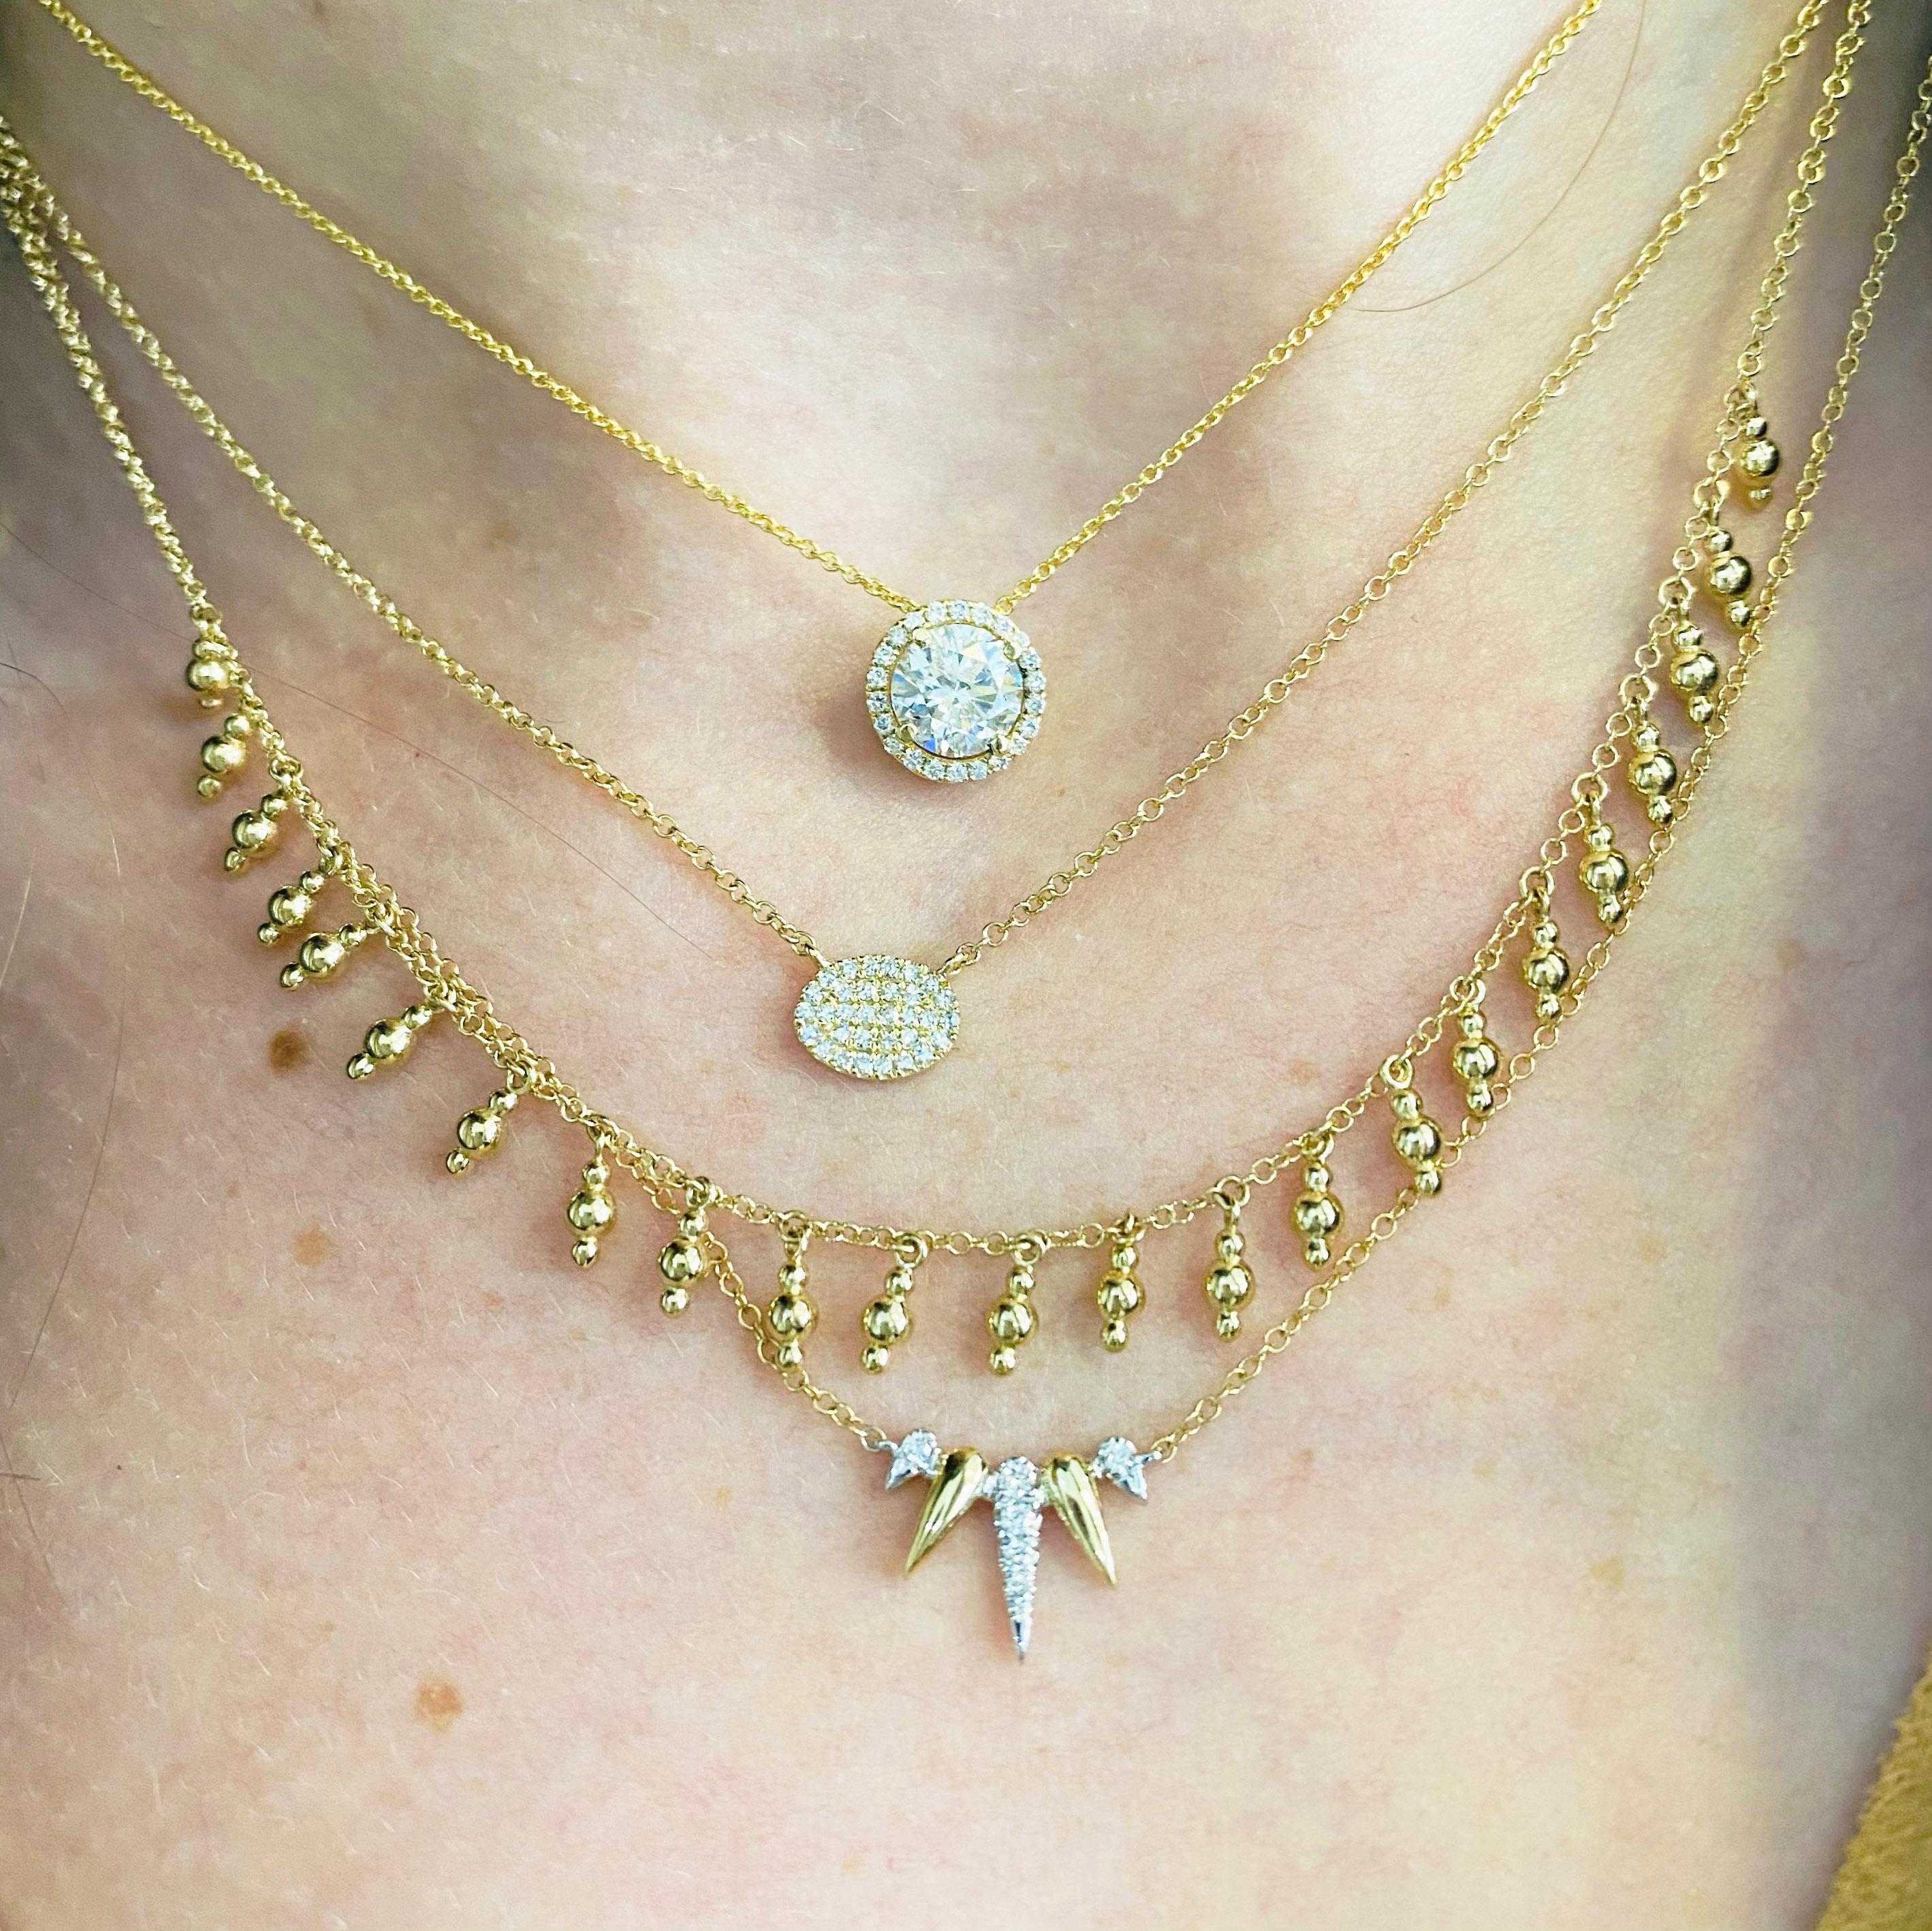 This gorgeous .94 carat center diamond set inside a brilliant white diamond halo and delicately hanging from a 14k yellow gold chain is sure to put a smile on anyone's face! The adjustable chain with an adorable hidden heart design on this necklace